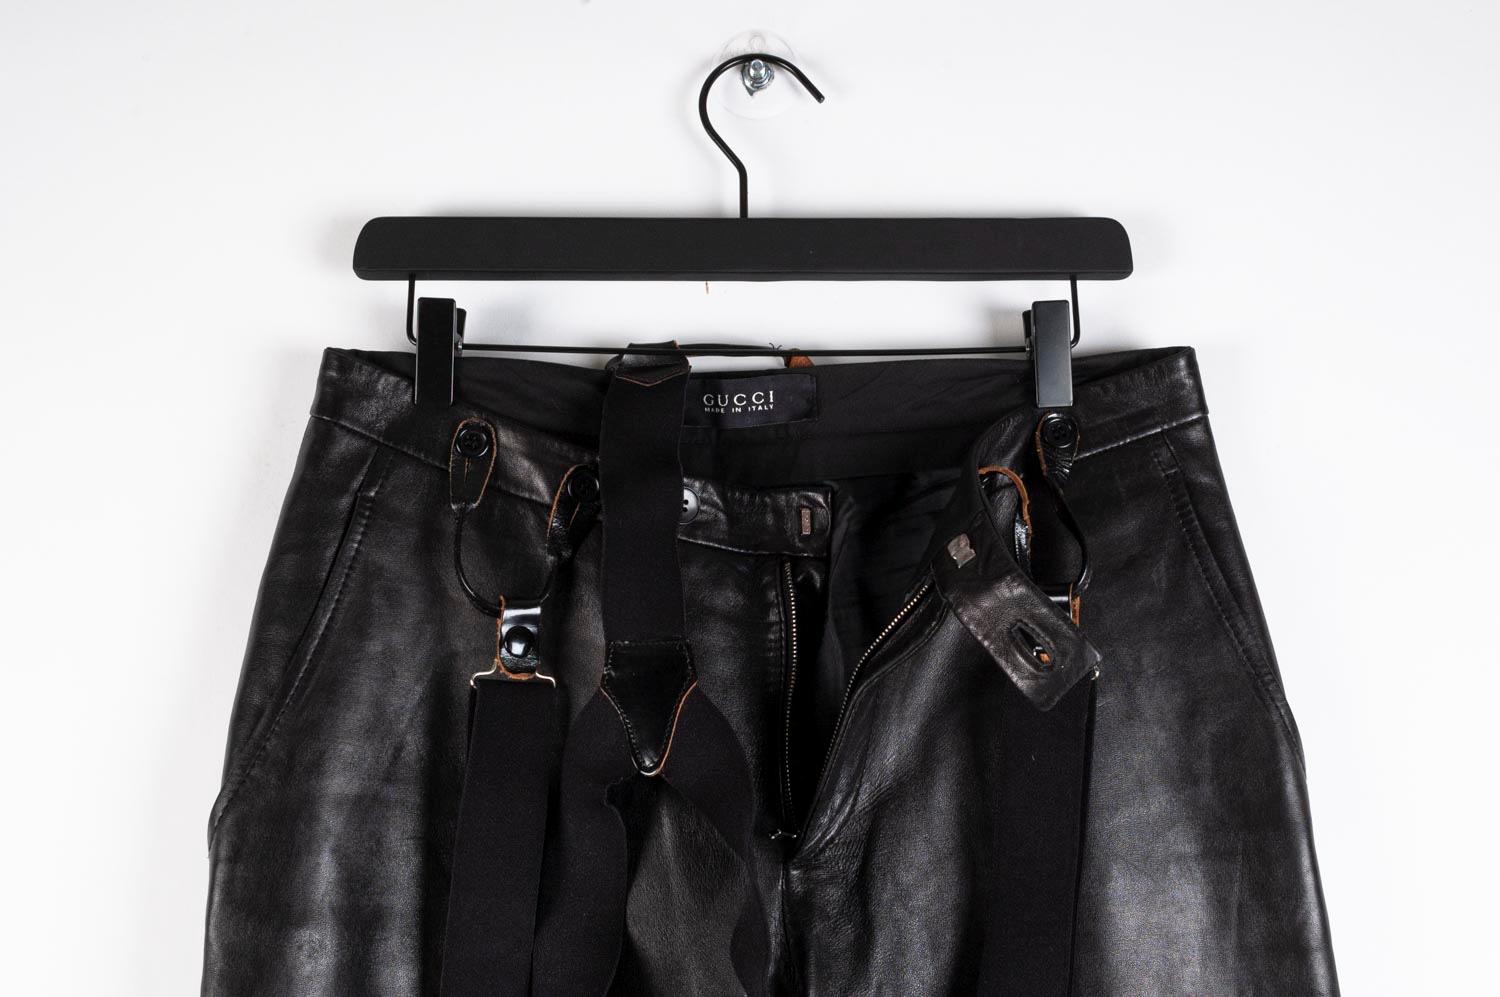 Item for sale is 100% genuine Gucci Leather Men Pants (I am selling them with suspenders not Gucci)
Color: Black
(An actual color may a bit vary due to individual computer screen interpretation)
Material: Genuine leather
Tag size: ITA48 (runs